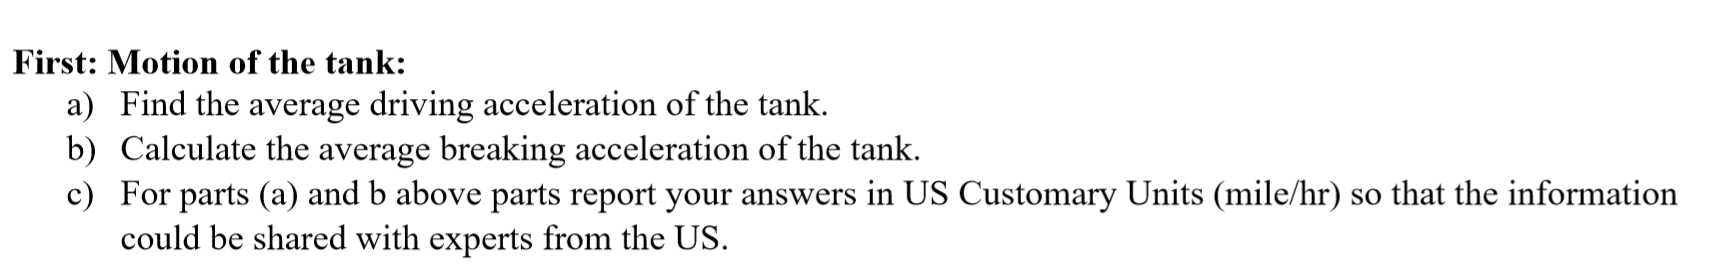 First: Motion of the tank:
a) Find the average driving acceleration of the tank.
b) Calculate the average breaking acceleration of the tank.
c) For parts (a) and b above parts report your answers in US Customary Units (mile/hr) so that the information
could be shared with experts from the US.
